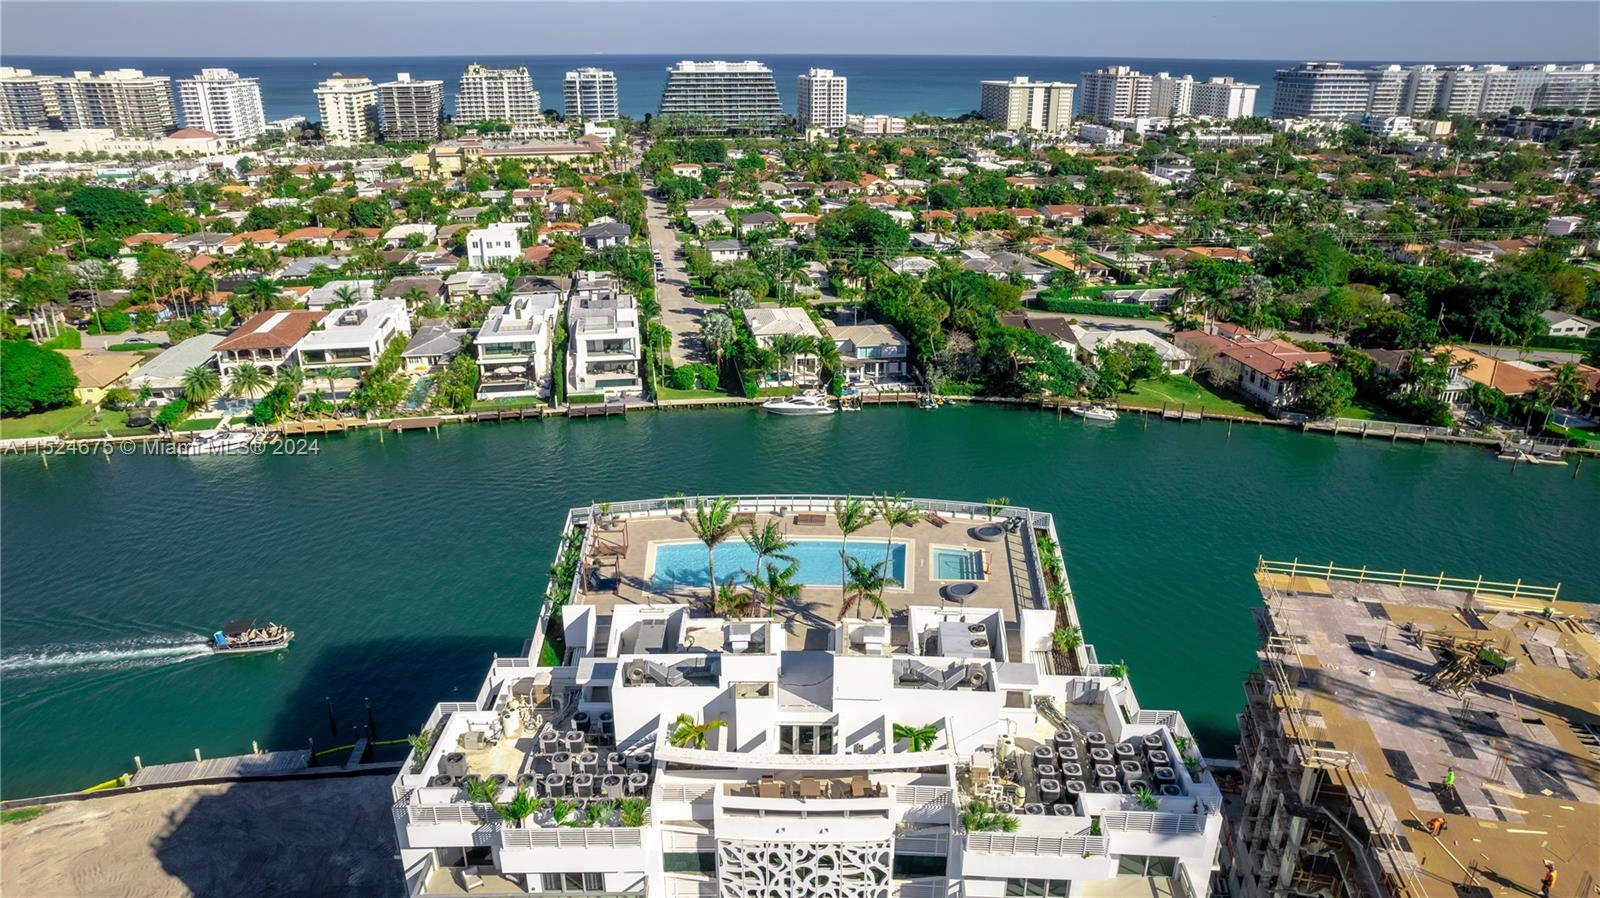 RARE OPPORTUNITY! Luxury fully furnished unit with partial water view in the sophisticated Bay Harbor Islands. This TURN-KEY RESIDENCE is fully equipped, featuring modern high-end furniture, premium wood tile, and numerous upgrades. Enjoy a ROOFTOP POOL WITH STUNNING VIEWS. The 2-bed + large den (converted to A 3rd bed) offers 1,305 sqft of living area and nearly 400 sqft of balconies. Situated in ONE OF THE MOST SOUGHT-AFTER AREAS in Greater Miami, very close to Indian Creek, A-rated schools, and just minutes from the beach, Bal Harbour Shops, and trendy restaurants. Includes 2 ASSIGNED PARKING SPACES (a rarity on the island) and storage. New ultra-luxury building (La Baia) under construction on south lot, adding GREAT VALUE to the area. Don't miss out!